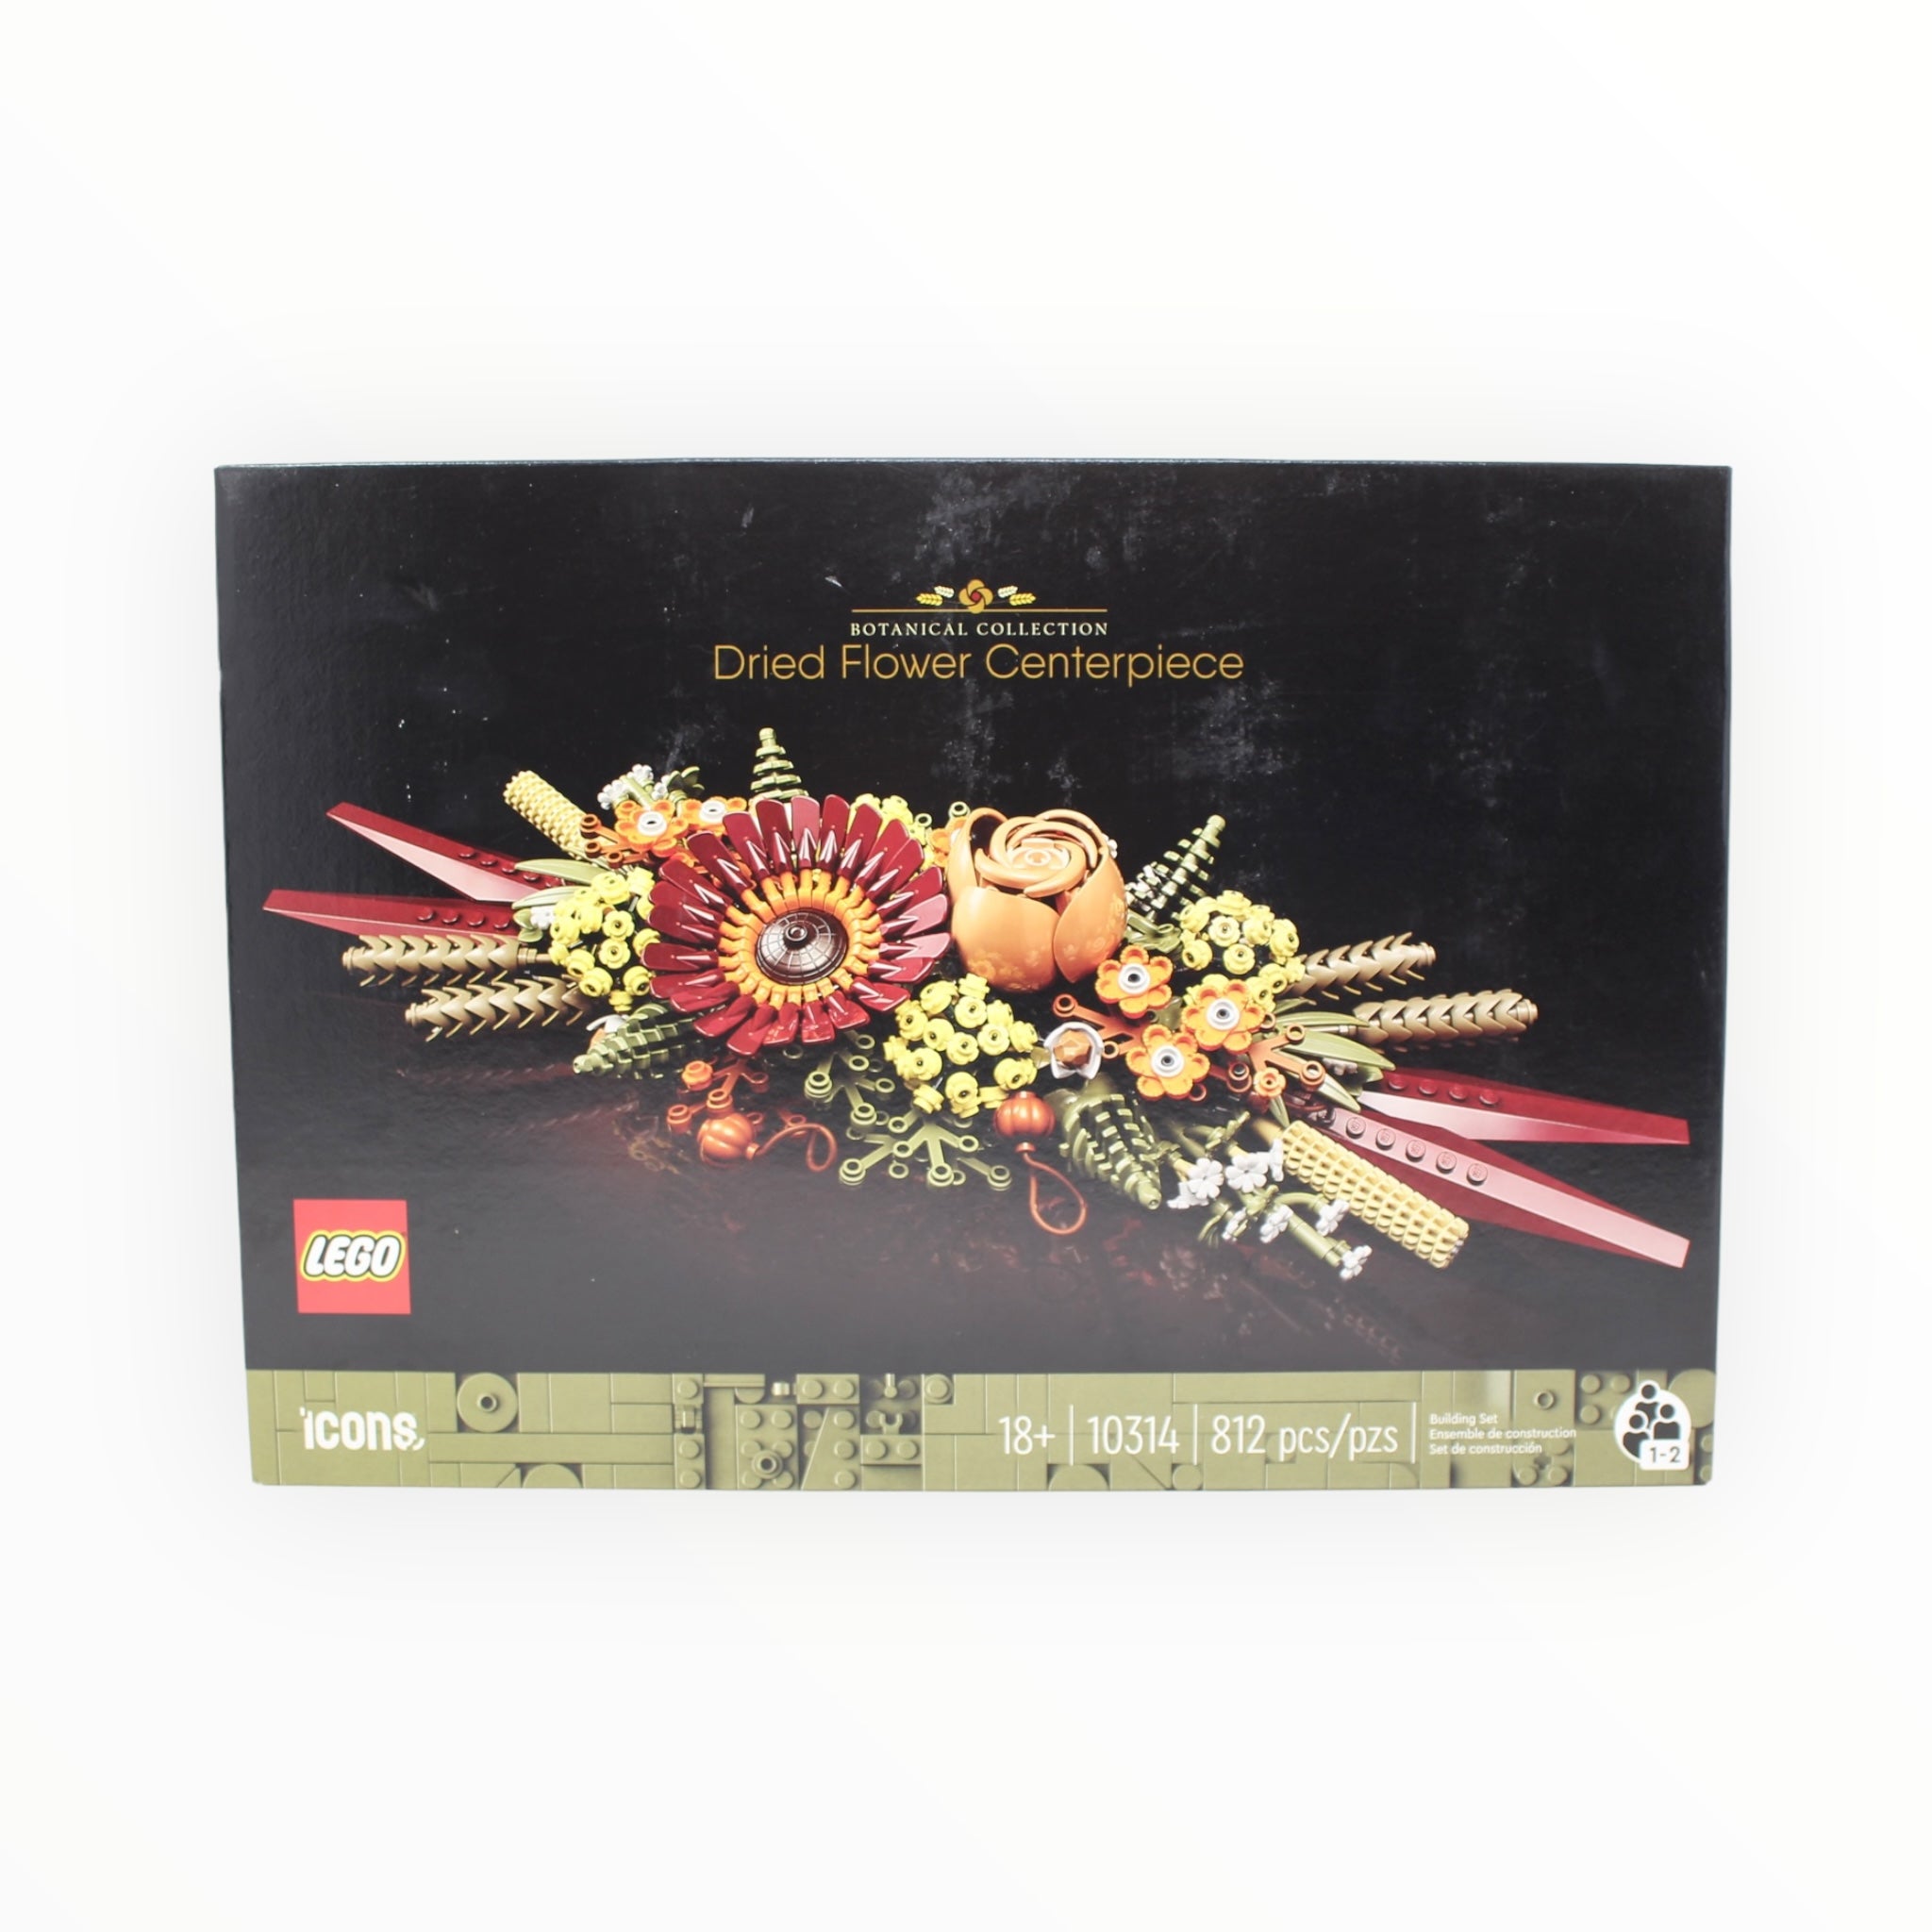 Certified Used Set 10314 Botanical Collection Dried Flower Centerpiece (some bags sealed)